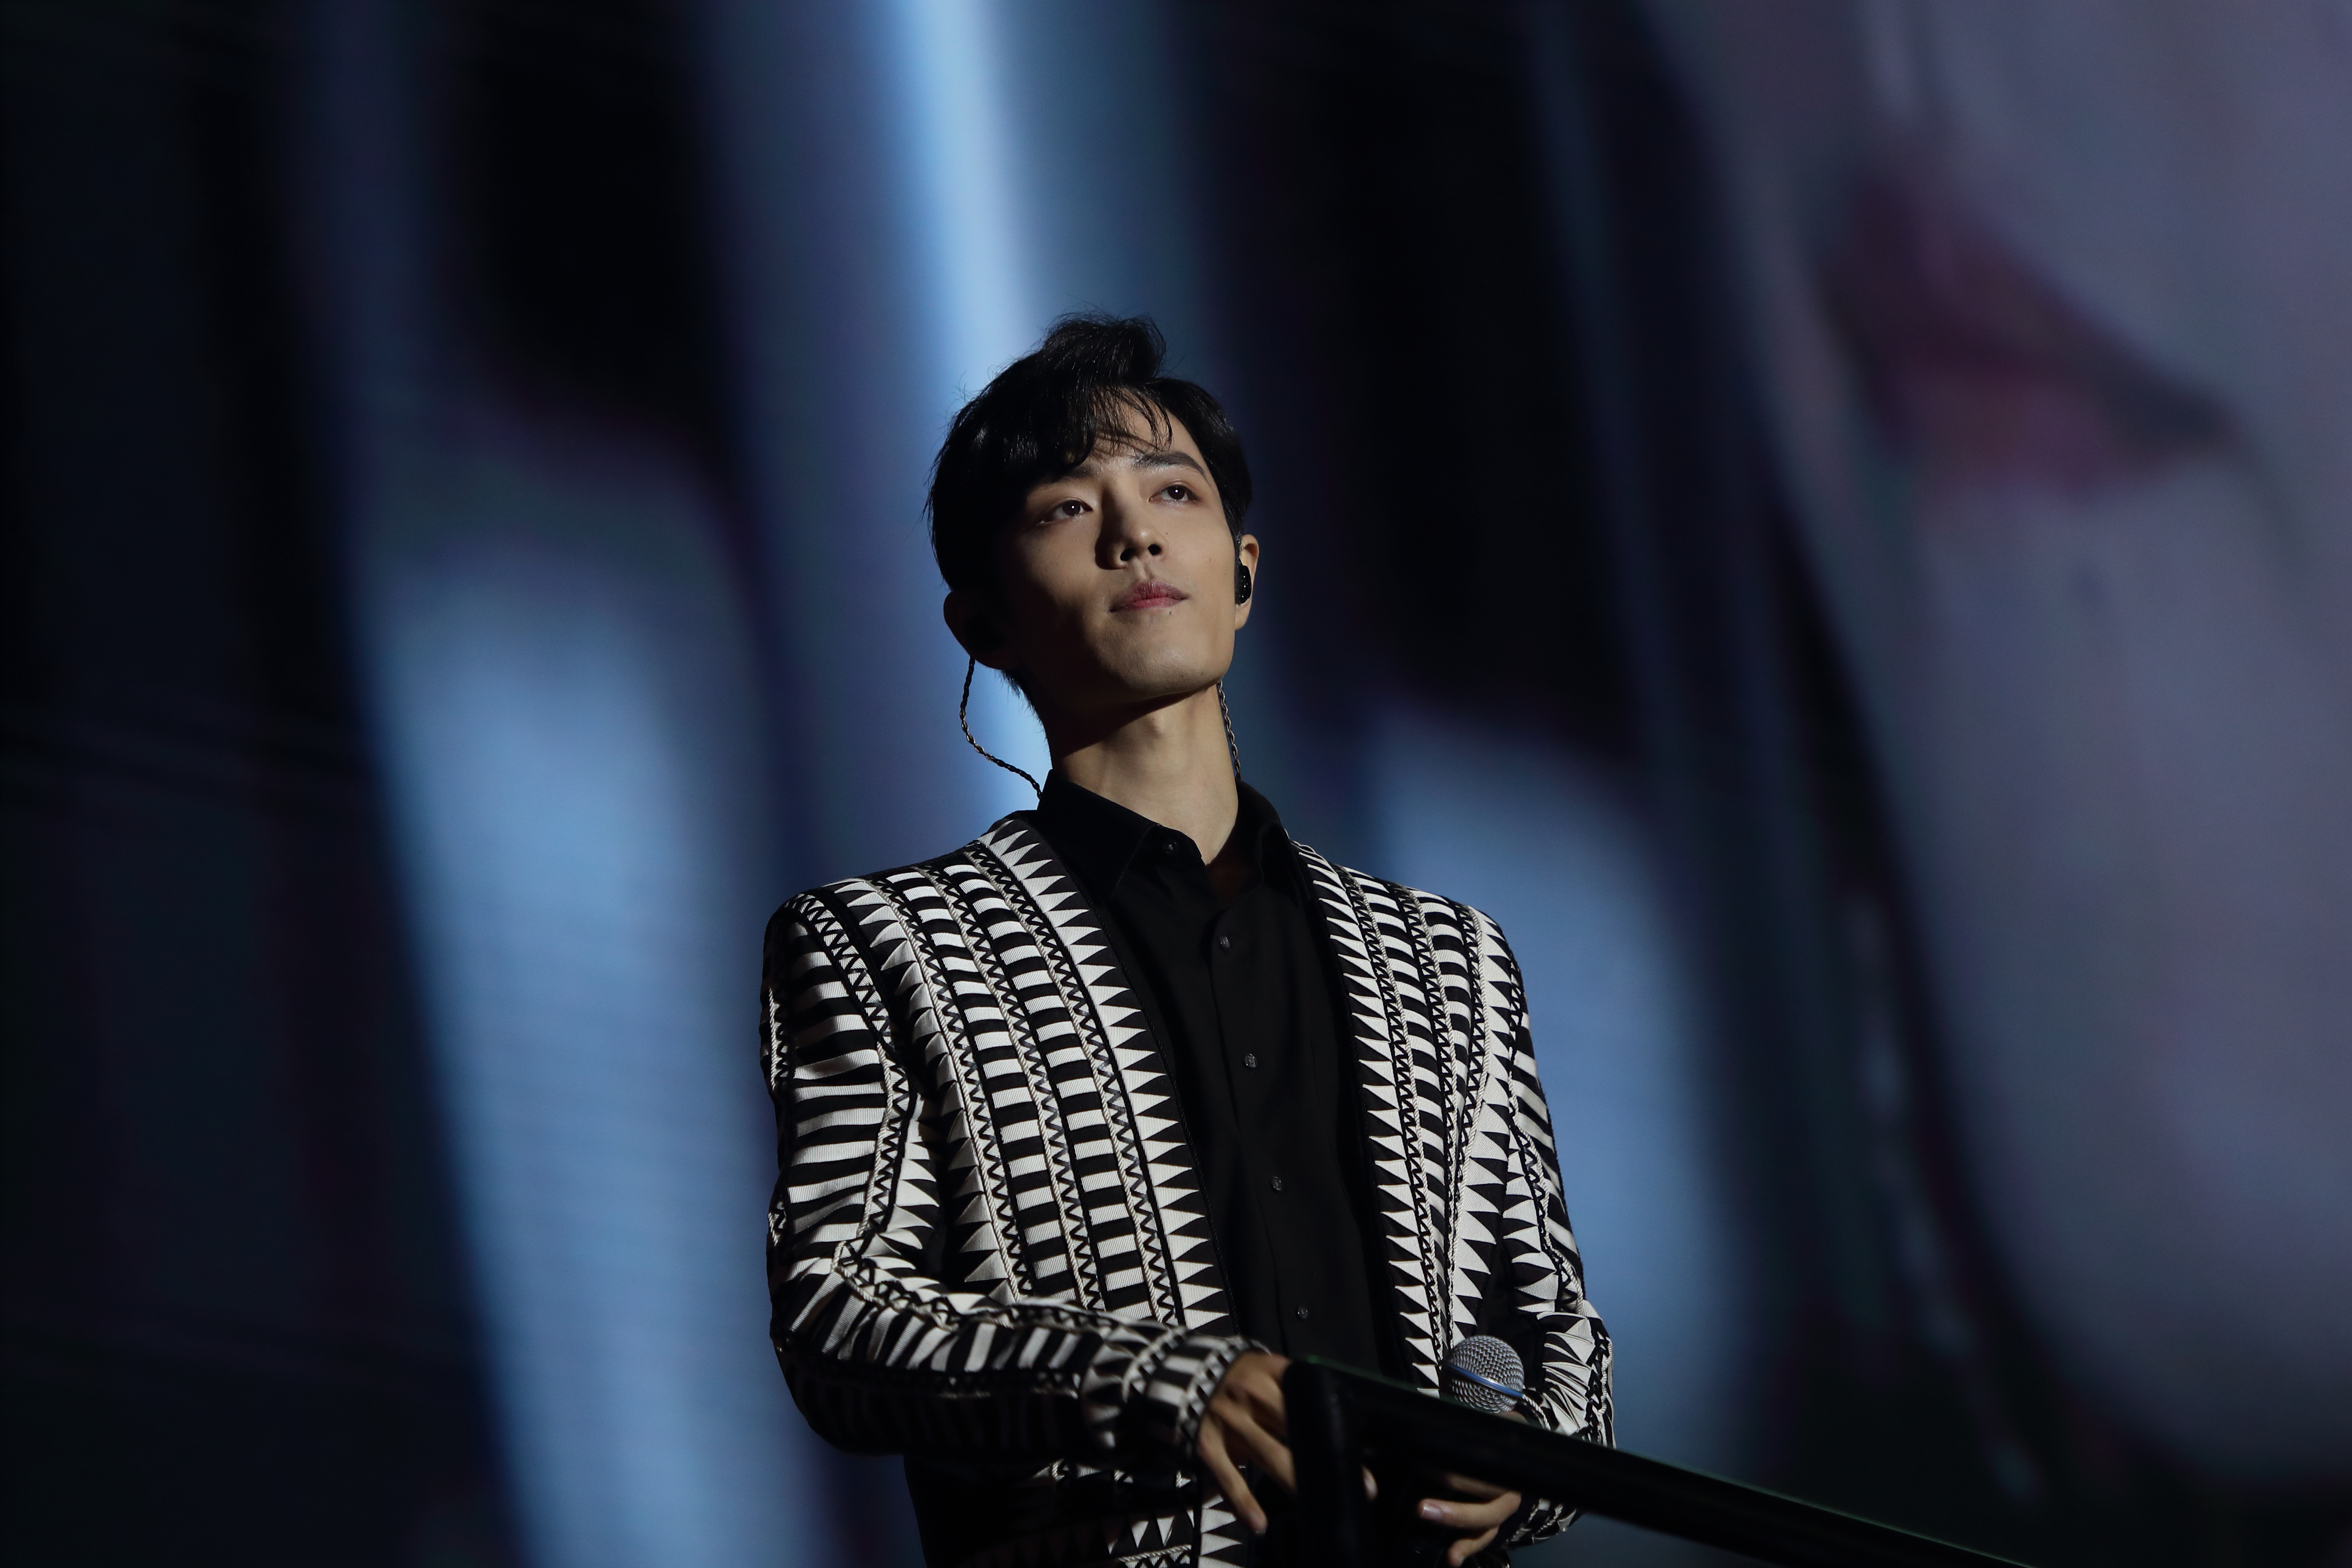 Chinese actor and singer Xiao Zhan, member of the male idol group X NINE, sings at the concert of his TV series The Untamed in Nanjing city, east China's Jiangsu province, 2 November 2019.   fachaoshiNo Use China. No Use France.